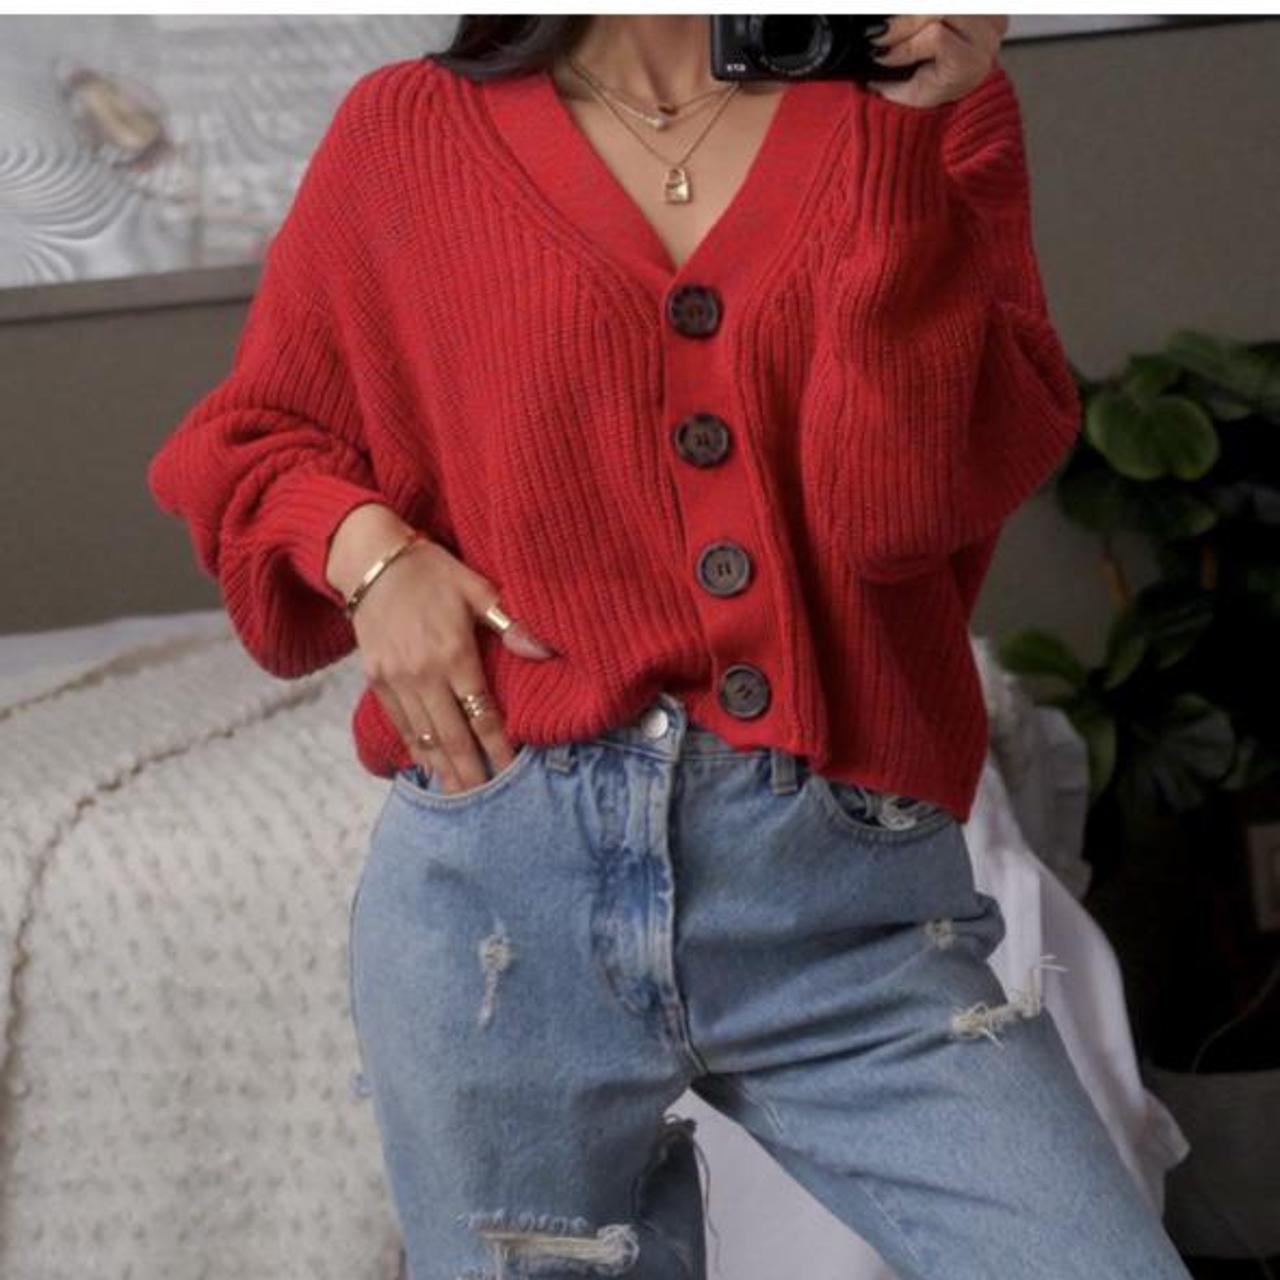 Urban Outfitters Women's Red Cardigan